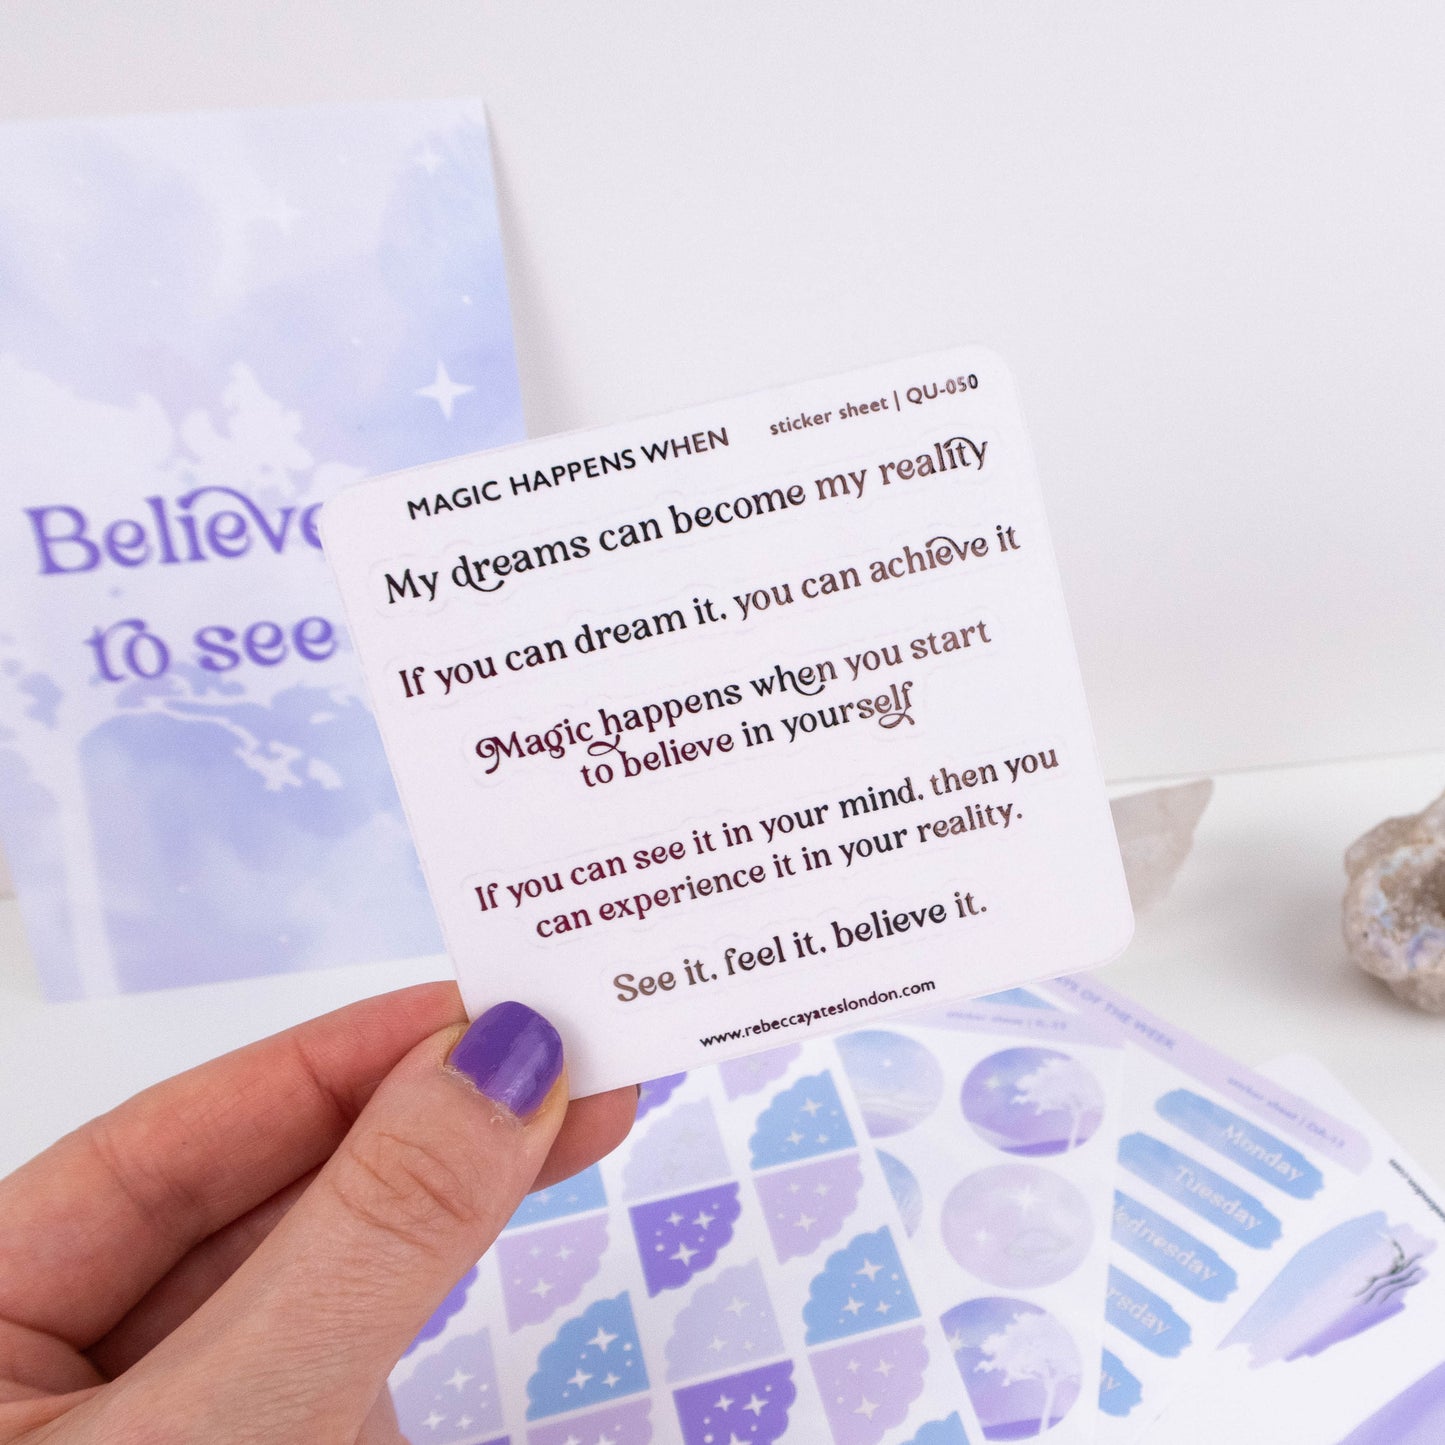 MAGIC HAPPENS WHEN - FOILED QUOTES STICKER SHEET